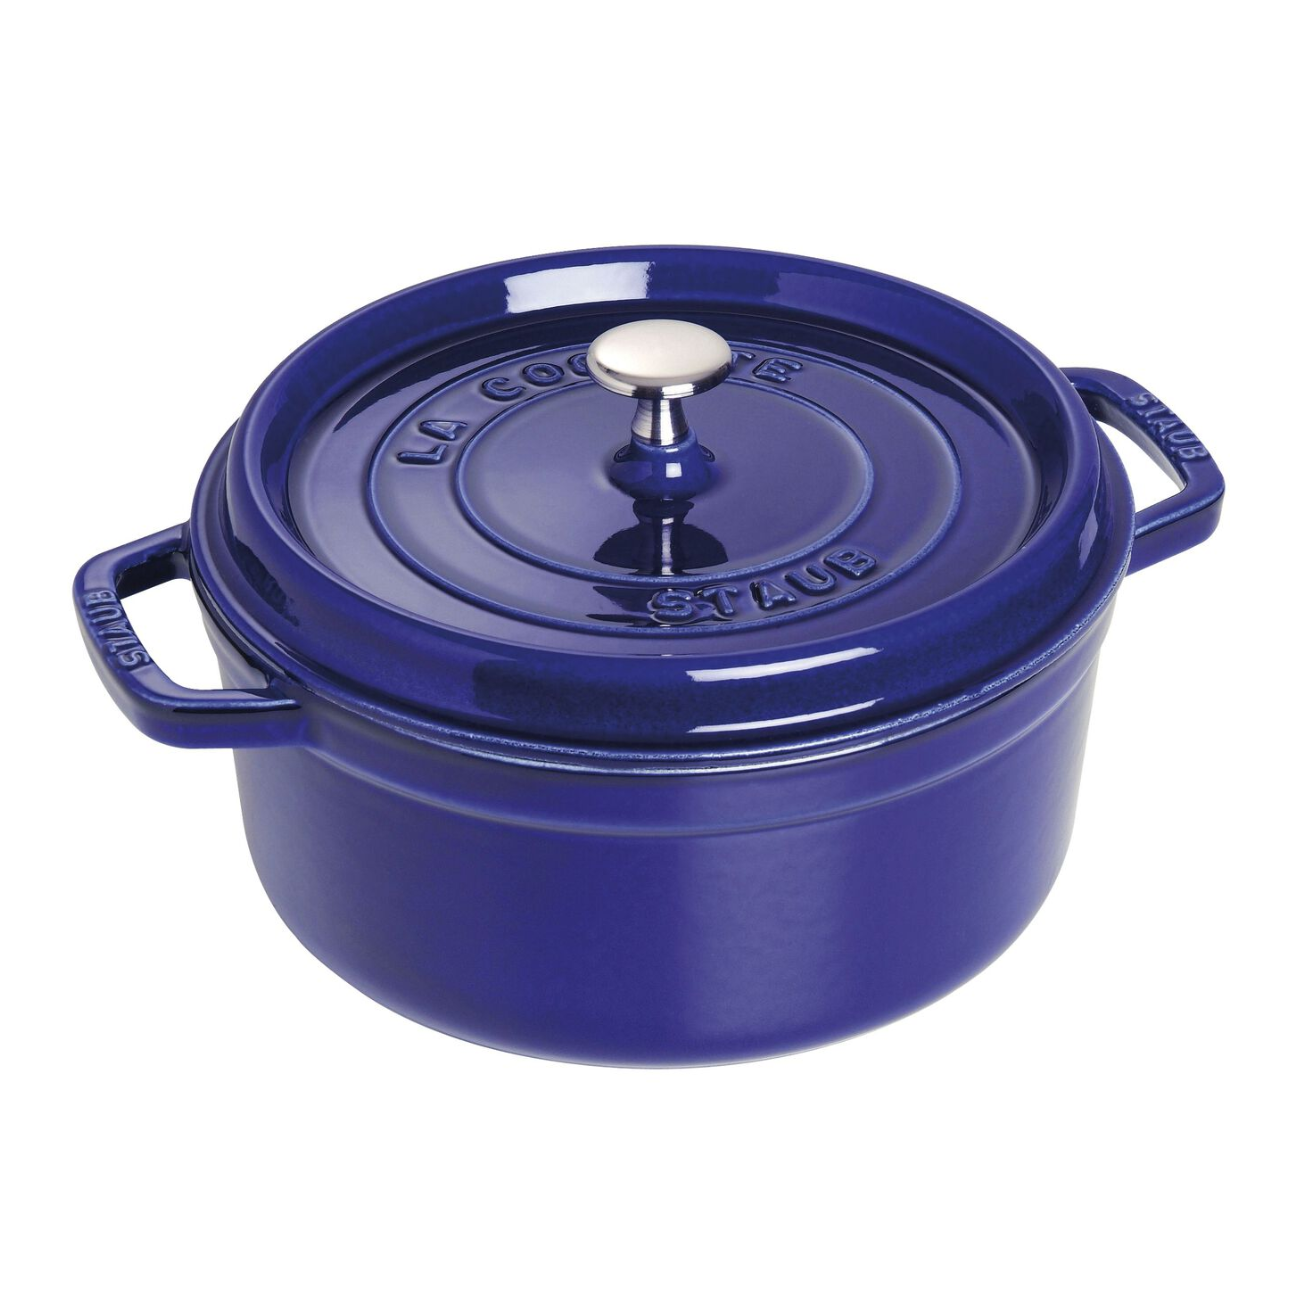 Staub Canada - Beautiful kitchen spaces and cookware needs beautiful  accessories 🖤 Personalize your kitchen with practical and decorative Staub  tools and accessories. Exquisite and ergonomic - they are perfectly  contoured to